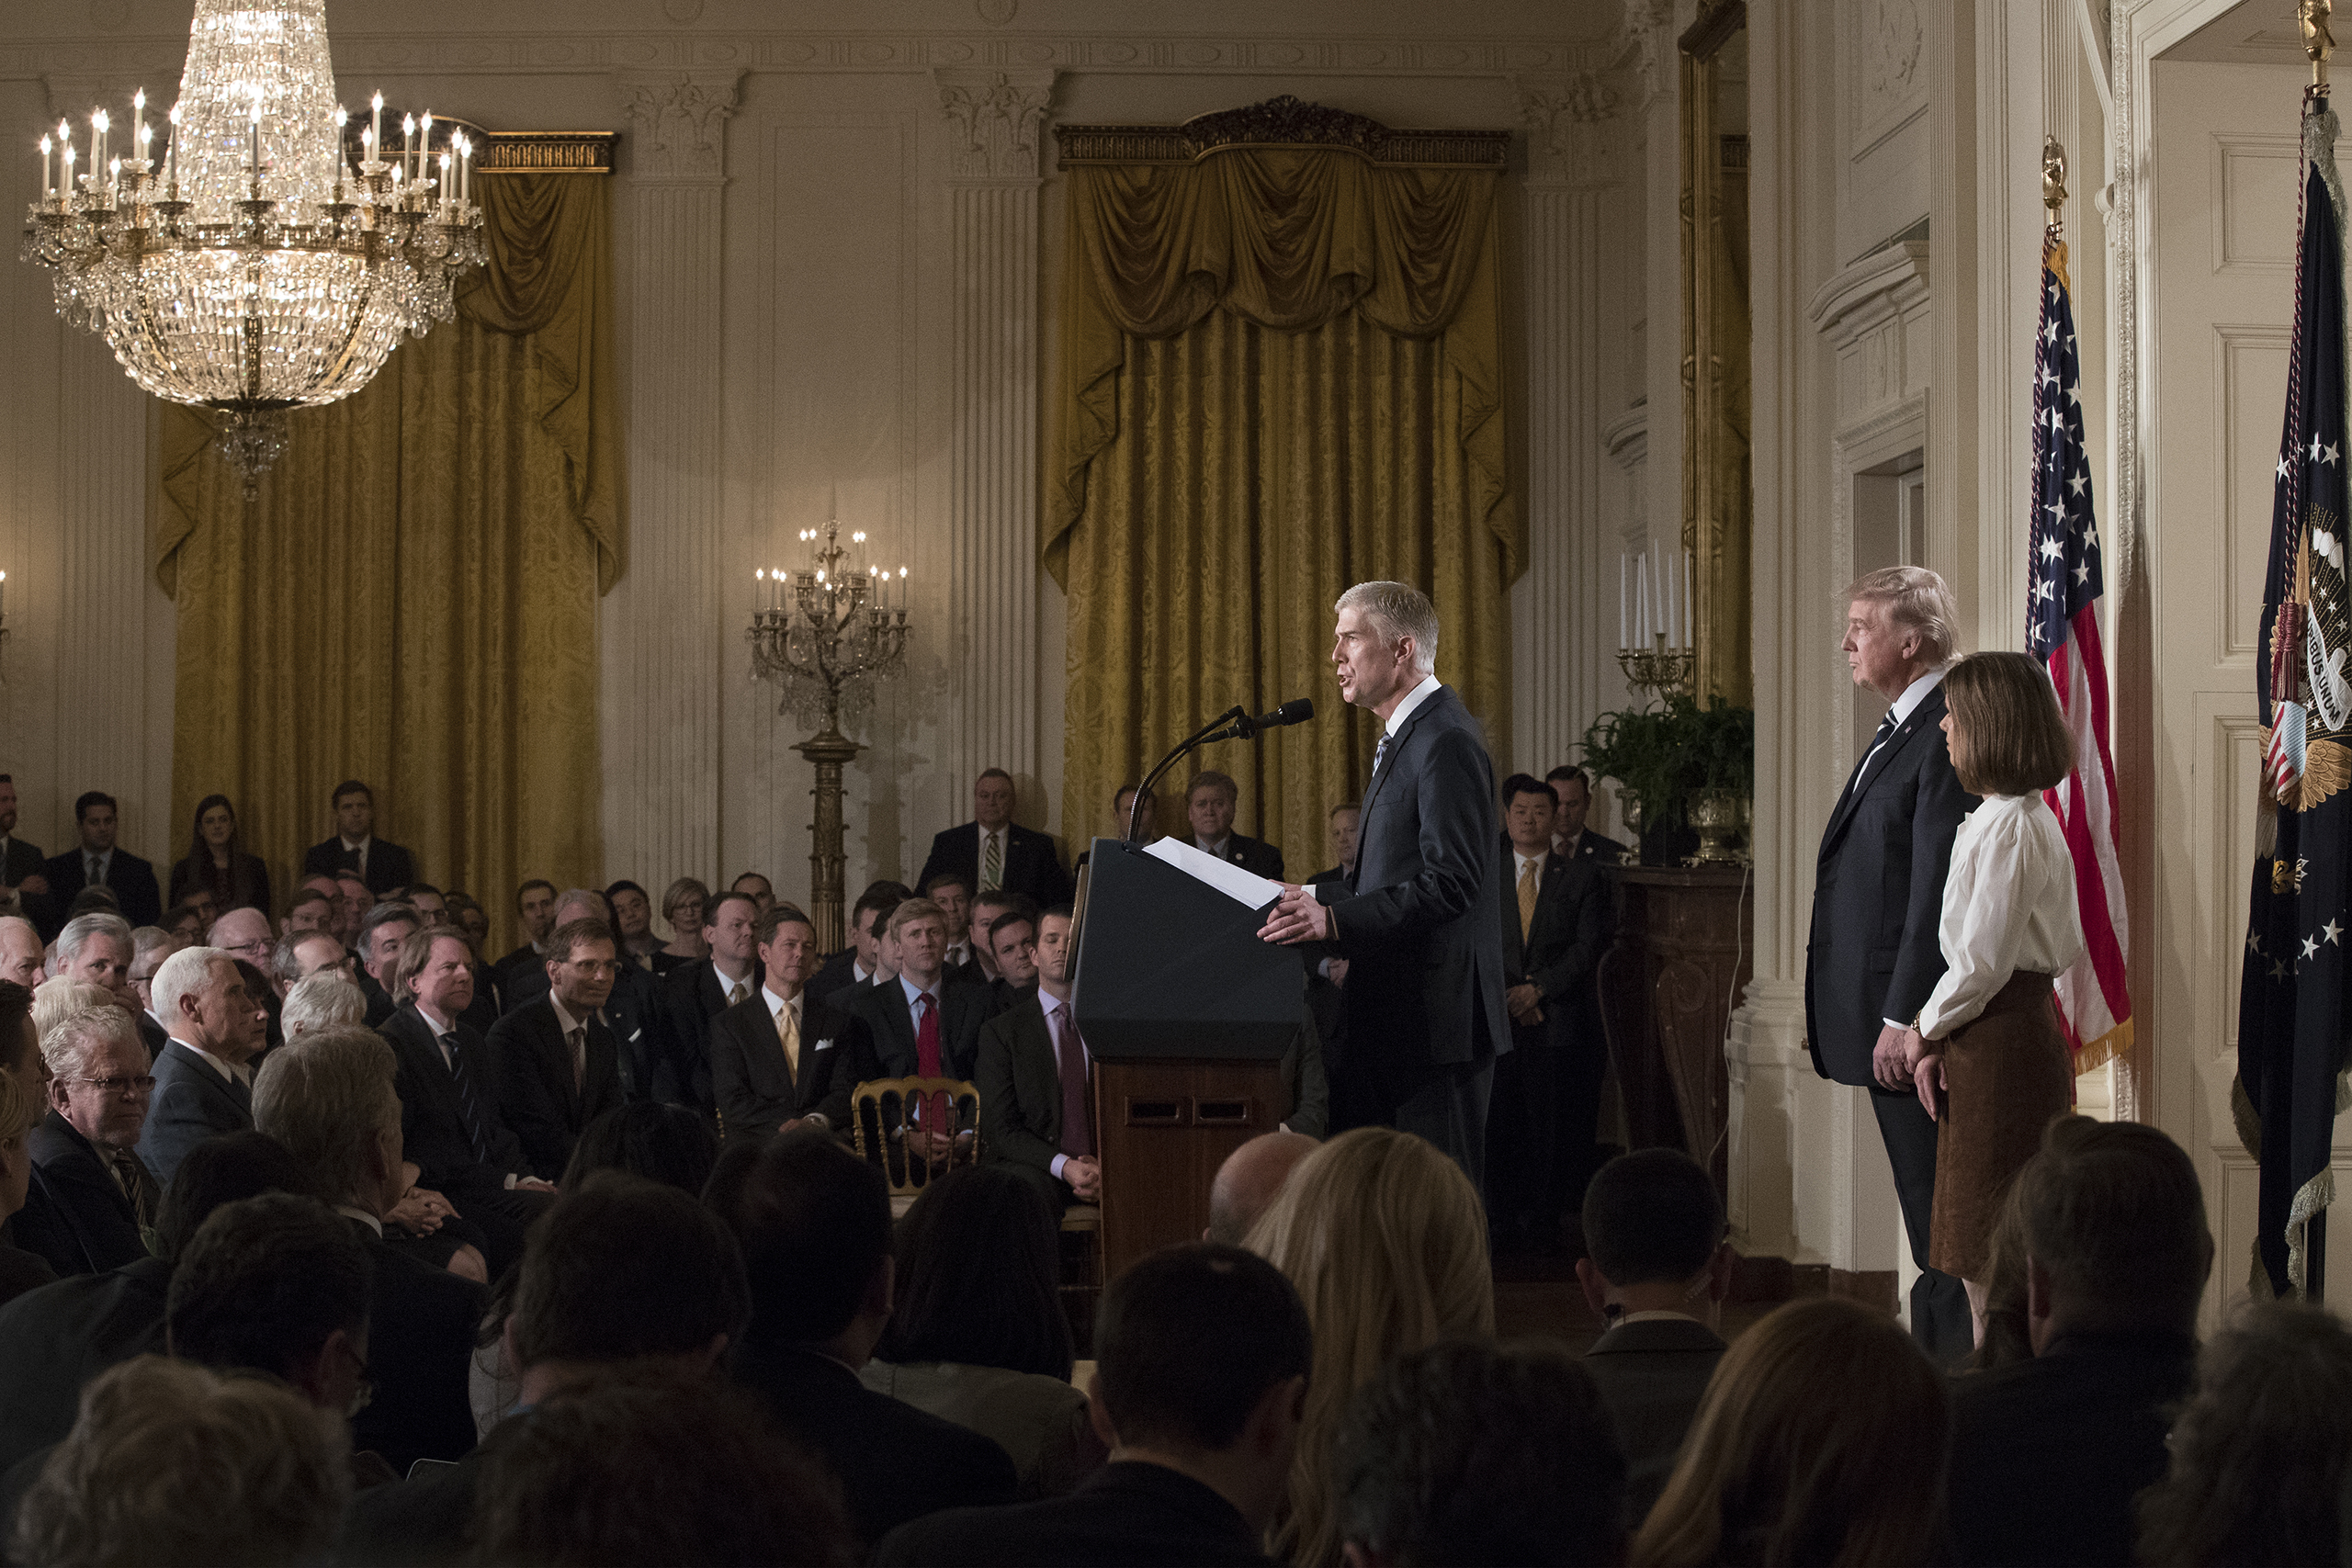 Neil Gorsuch delivers remarks after US President Donald Trump  announced him as his nominee for the Supreme Court in the East Room of the White House, on Jan. 31, 2017.